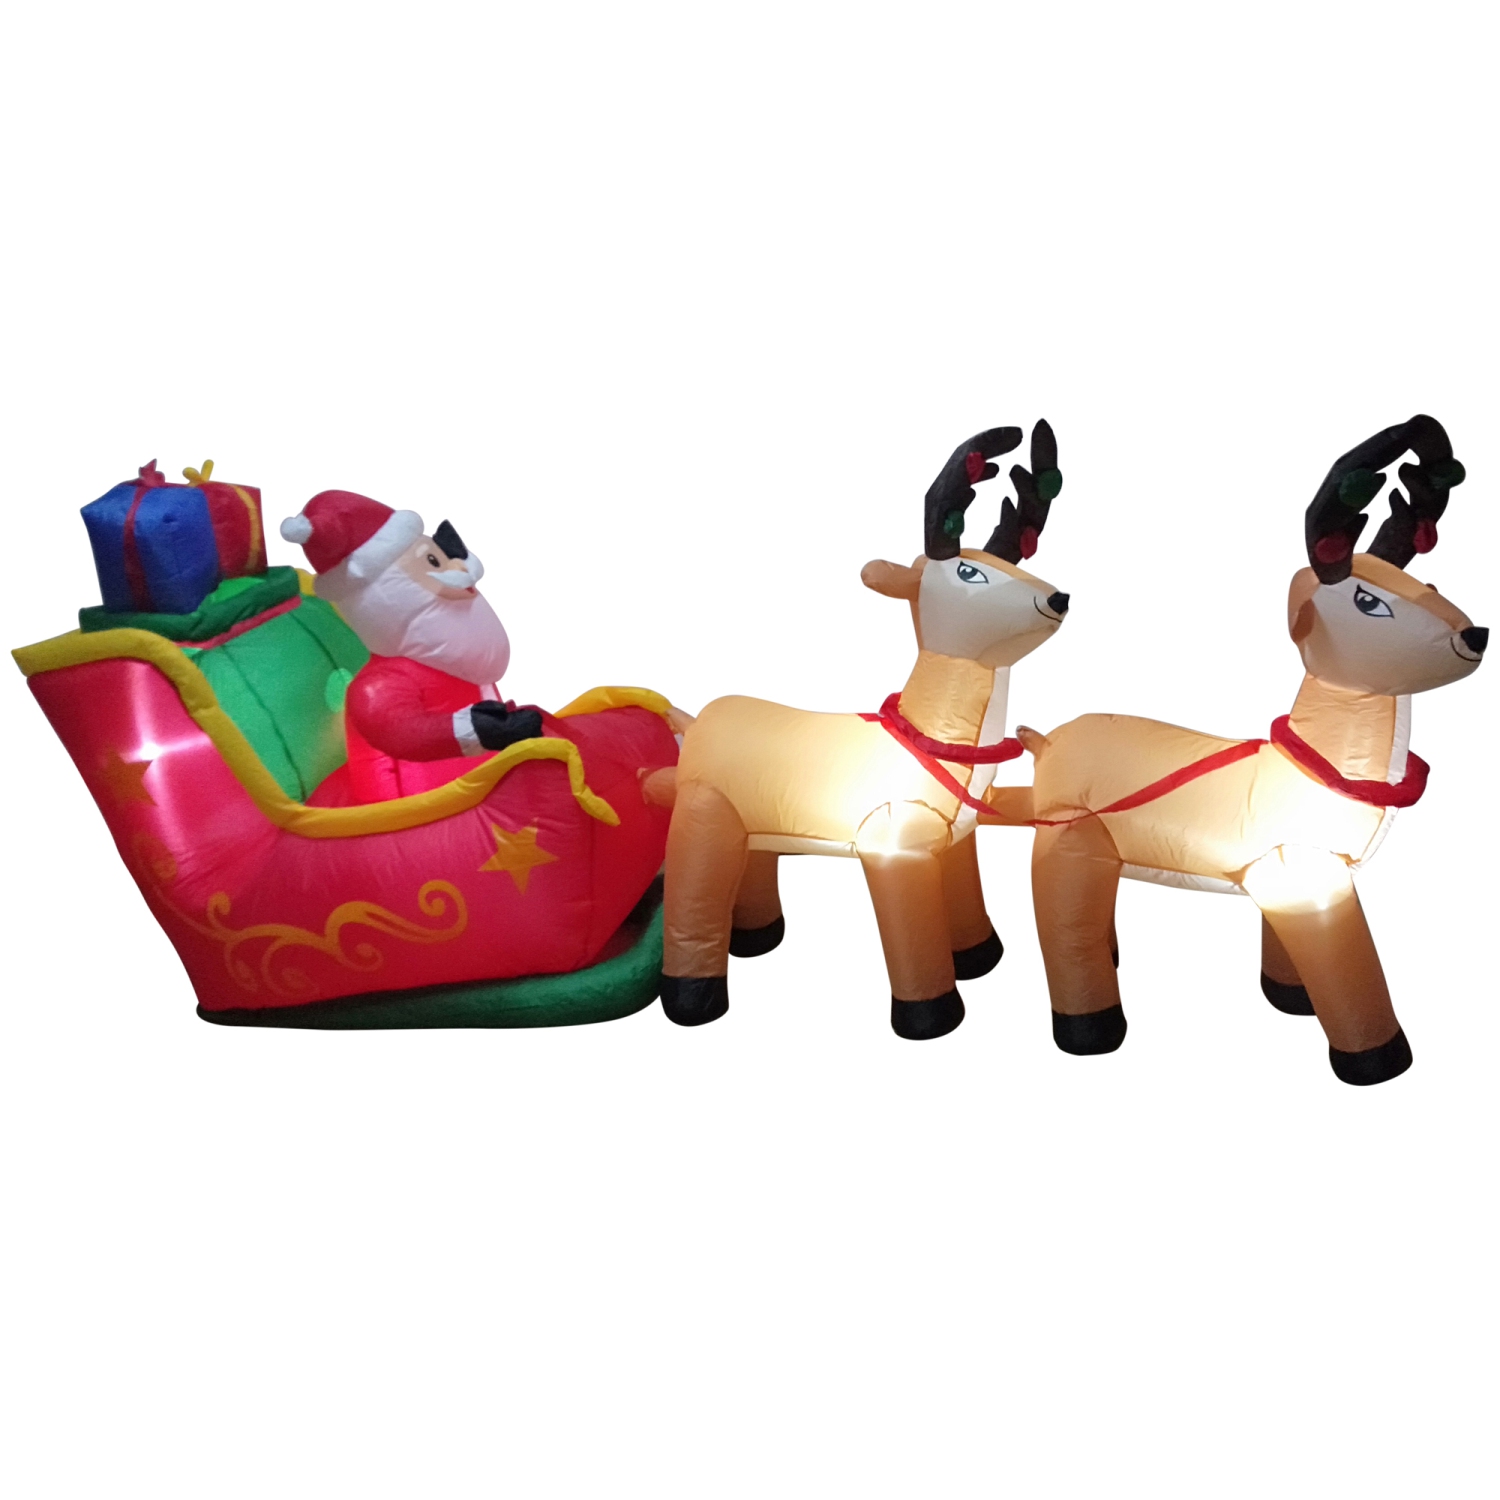 8' Inflatable Santa's Sleigh and Reindeer Outdoor Christmas Decoration